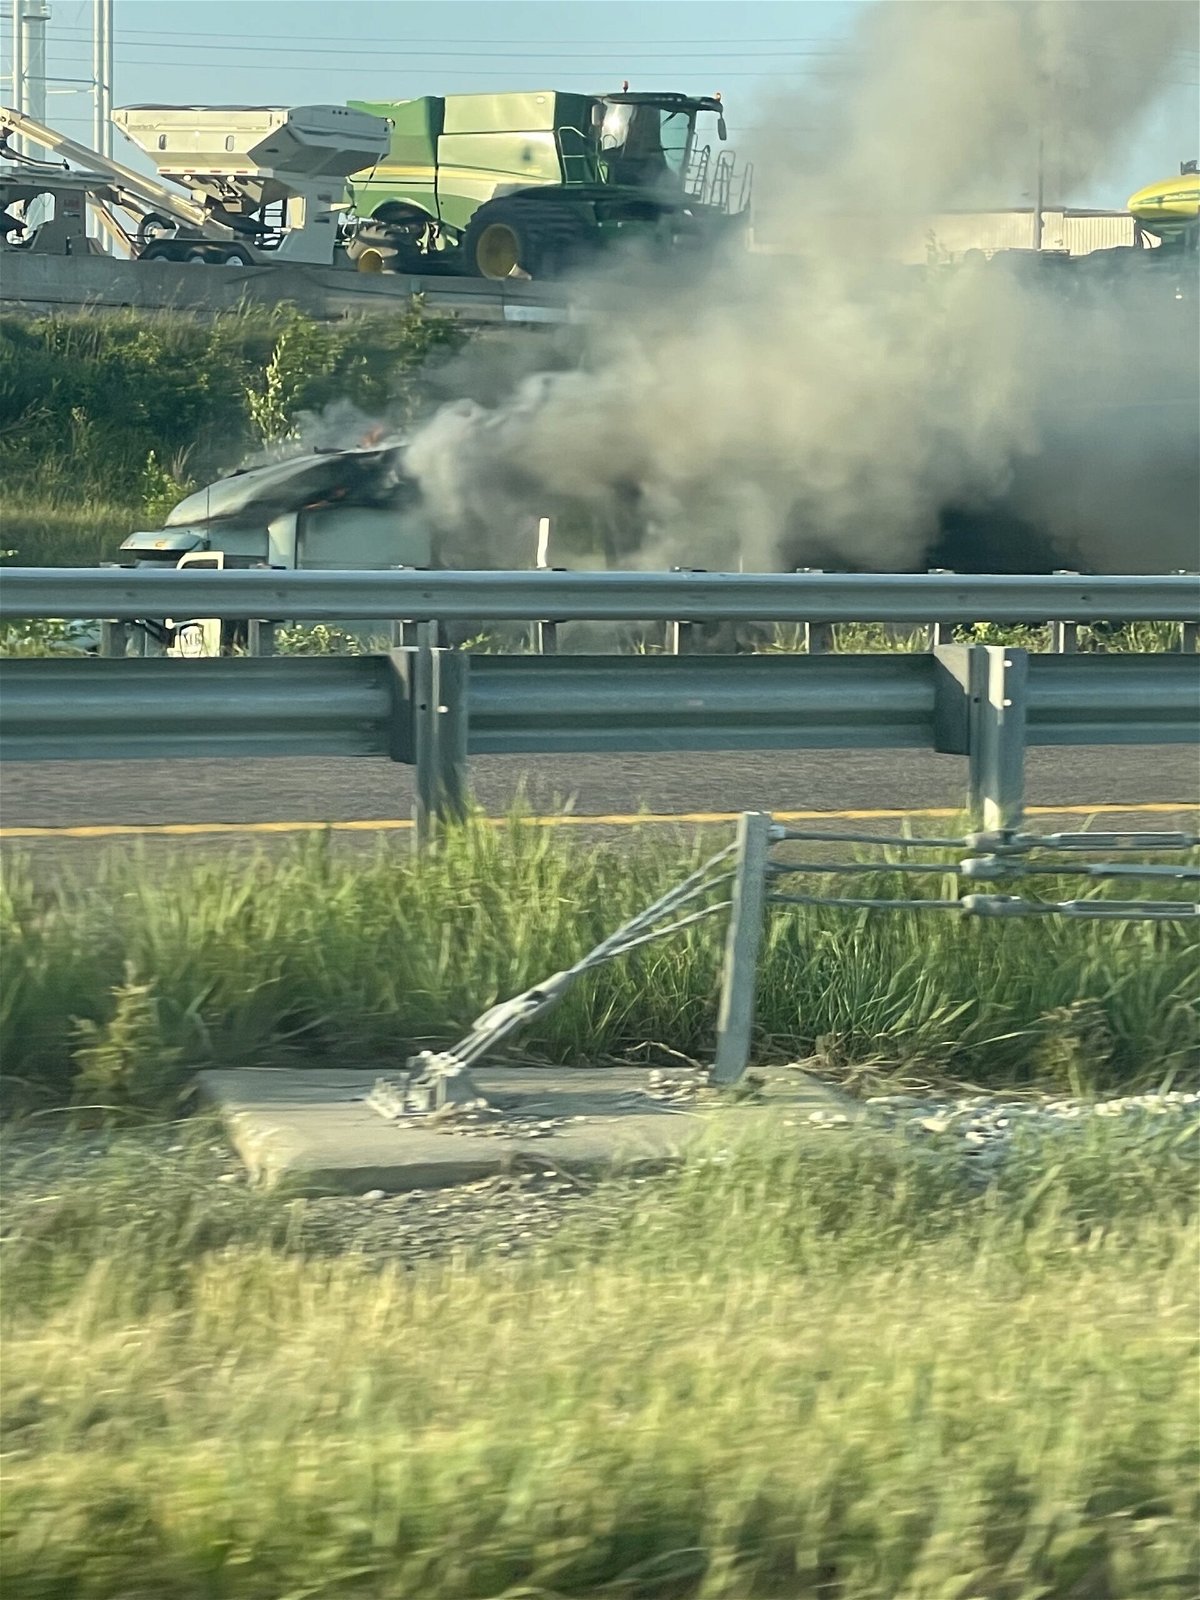 Heavy smoke could be seen coming from a tractor trailer that caught fire Monday evening off at the Interstate 70 off ramp to Route J in Boone County.